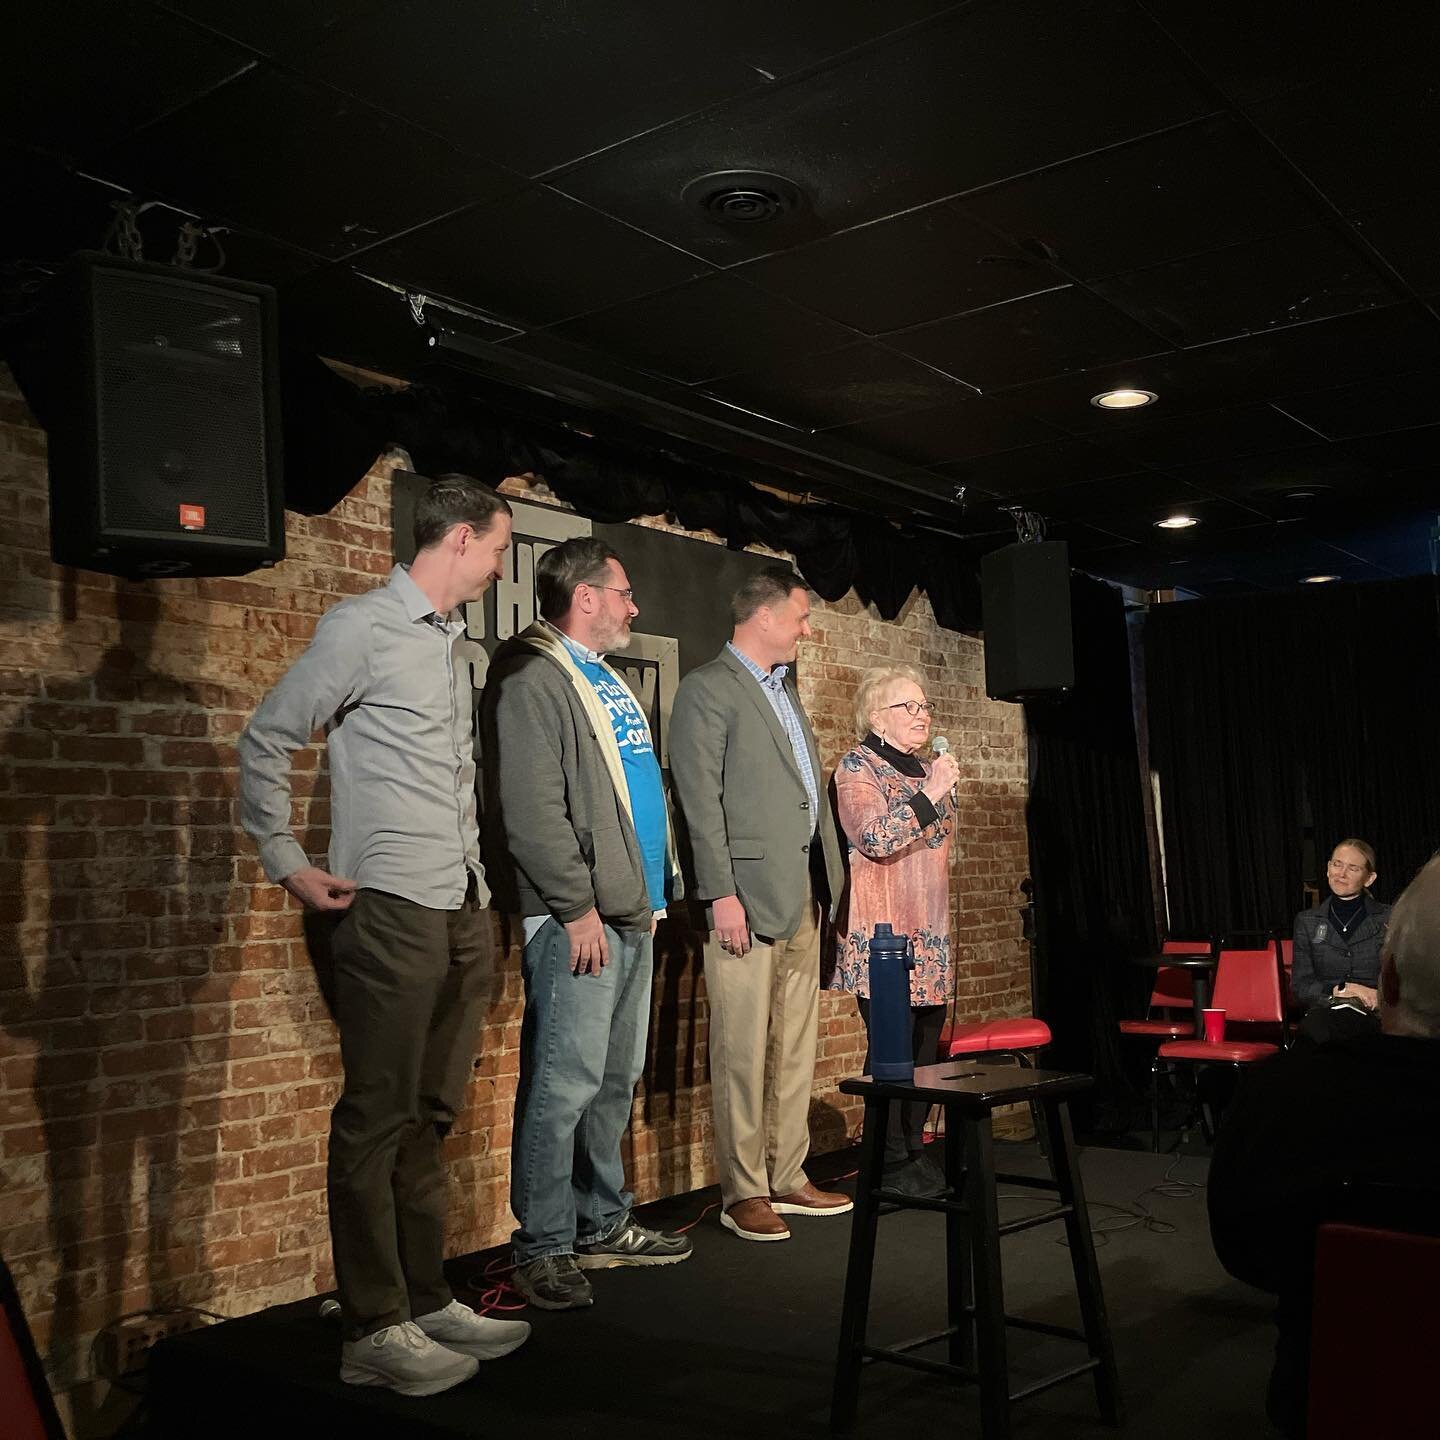 Thank you to everyone who attended our event at the comedy attic! We got to hear from some candidates about local issues and then hear from some local comedians!